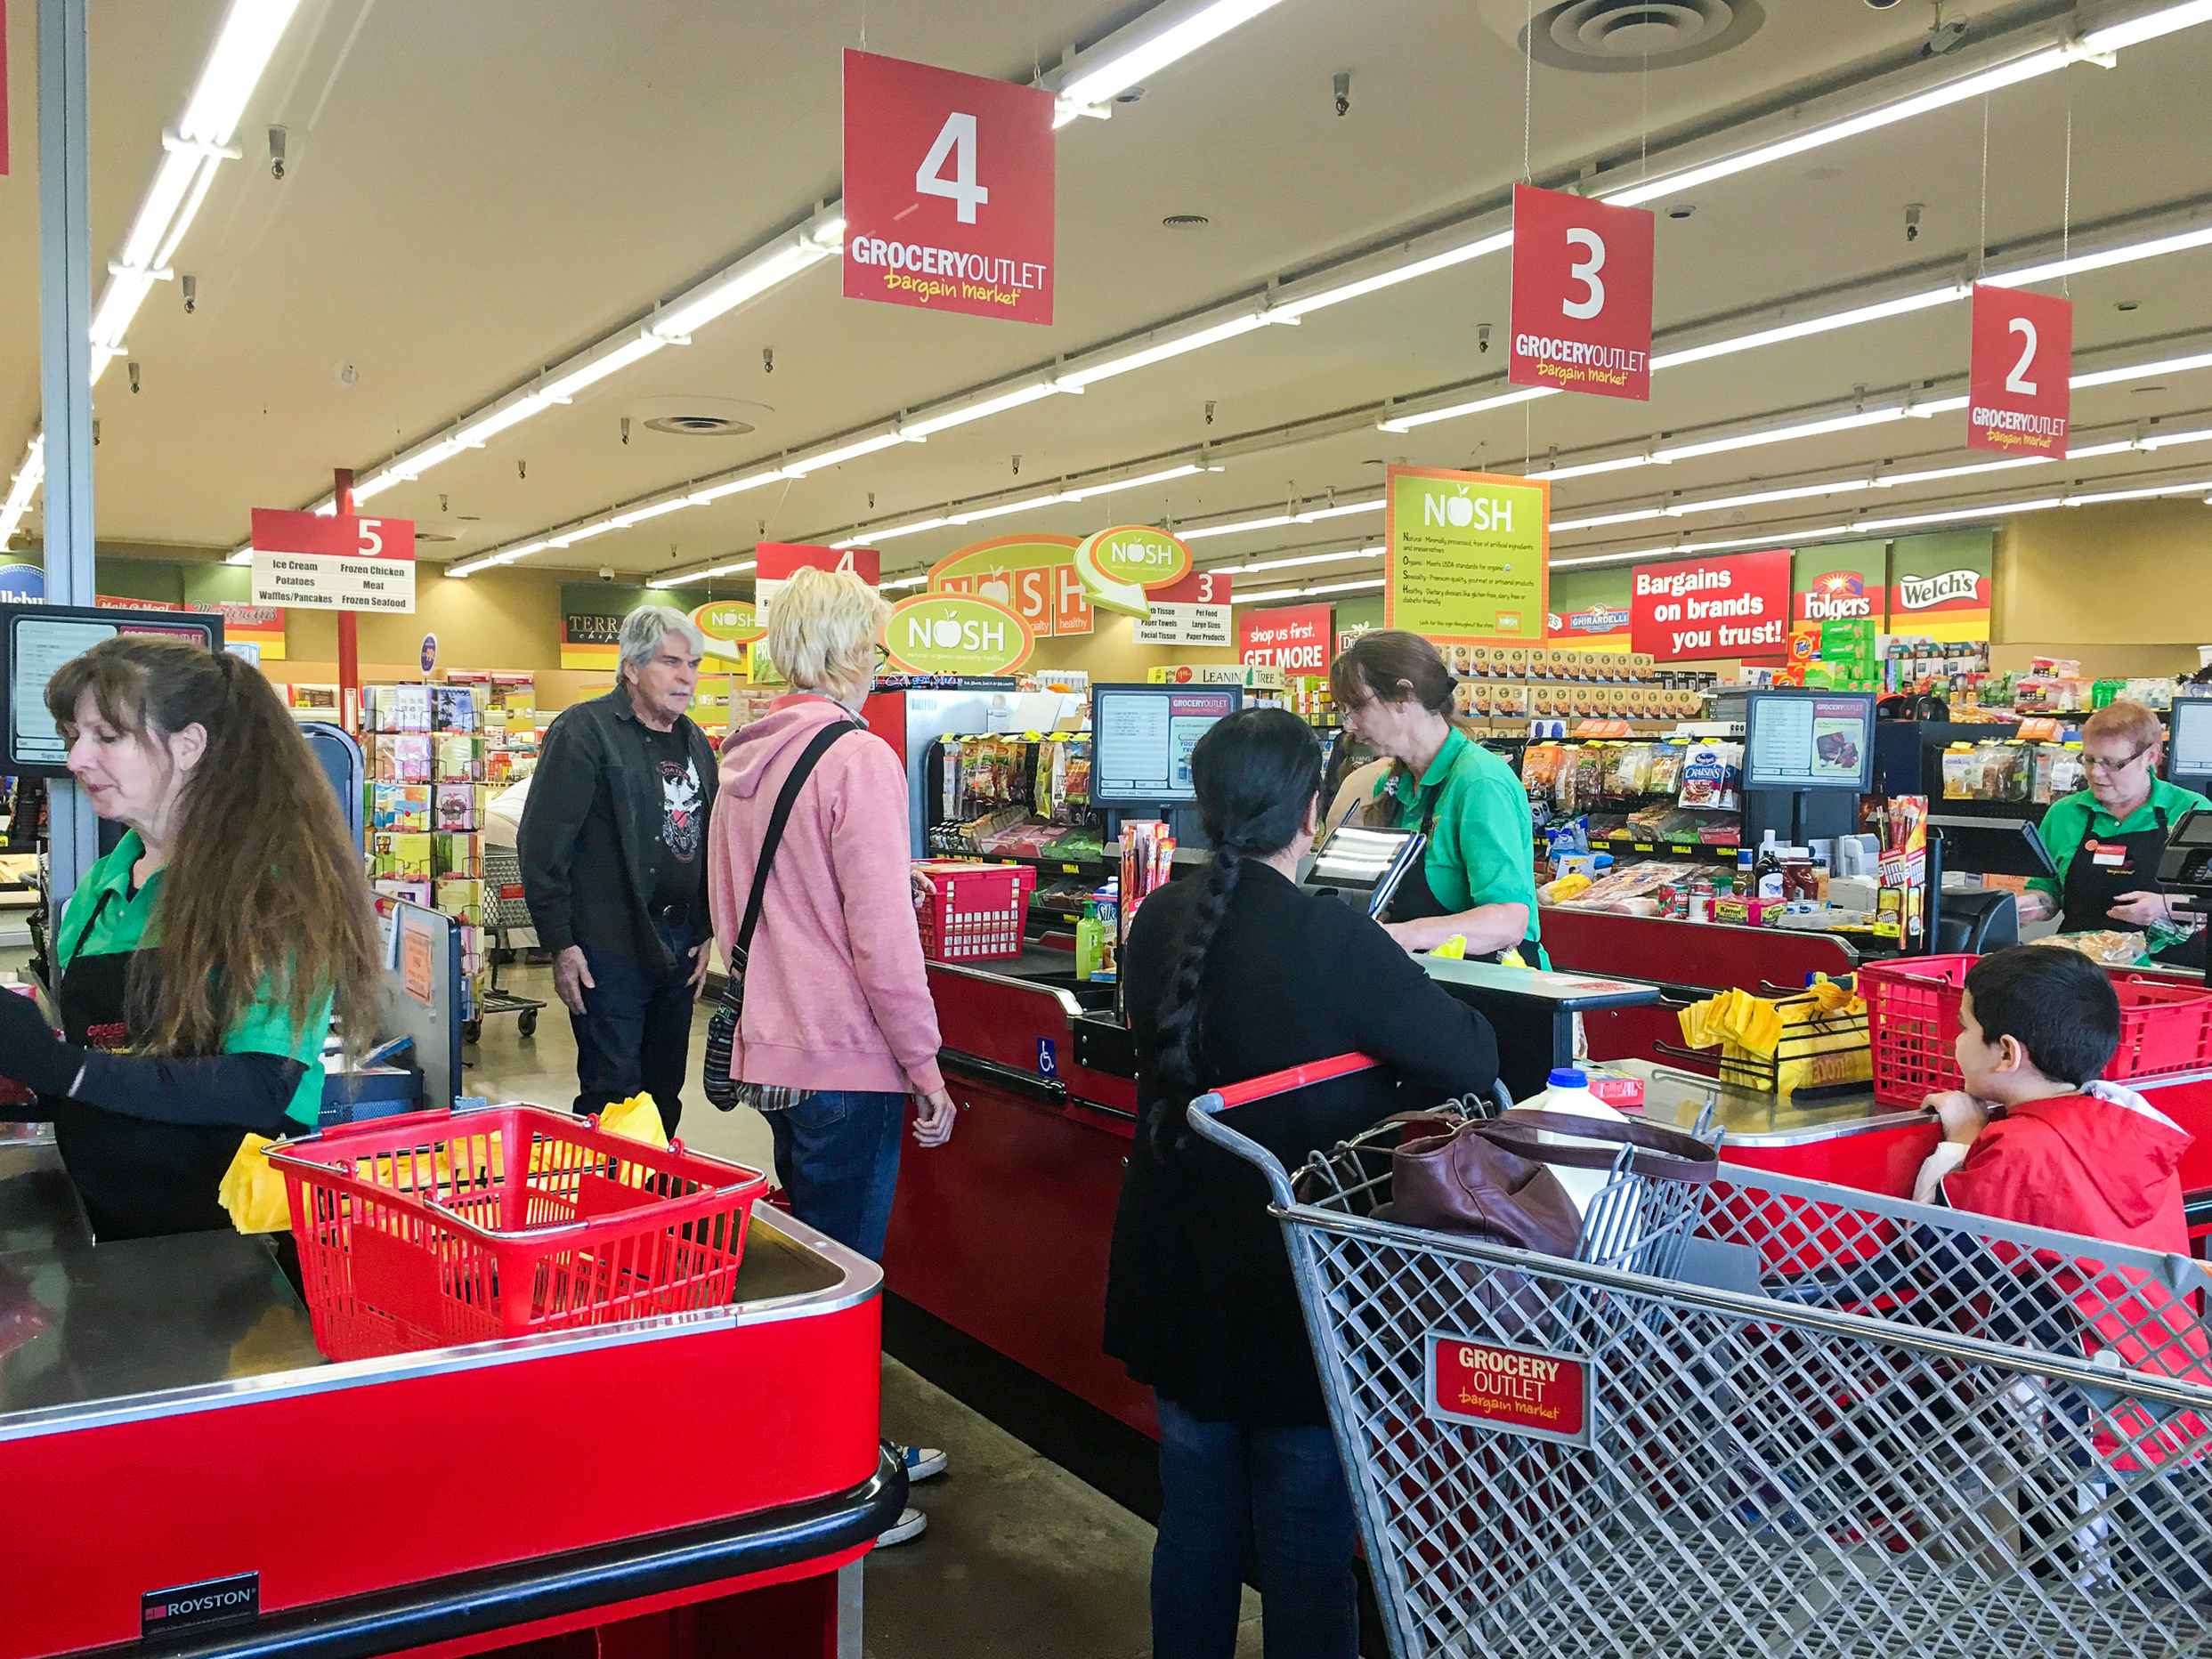 People checking out at a Grocery Outlet store